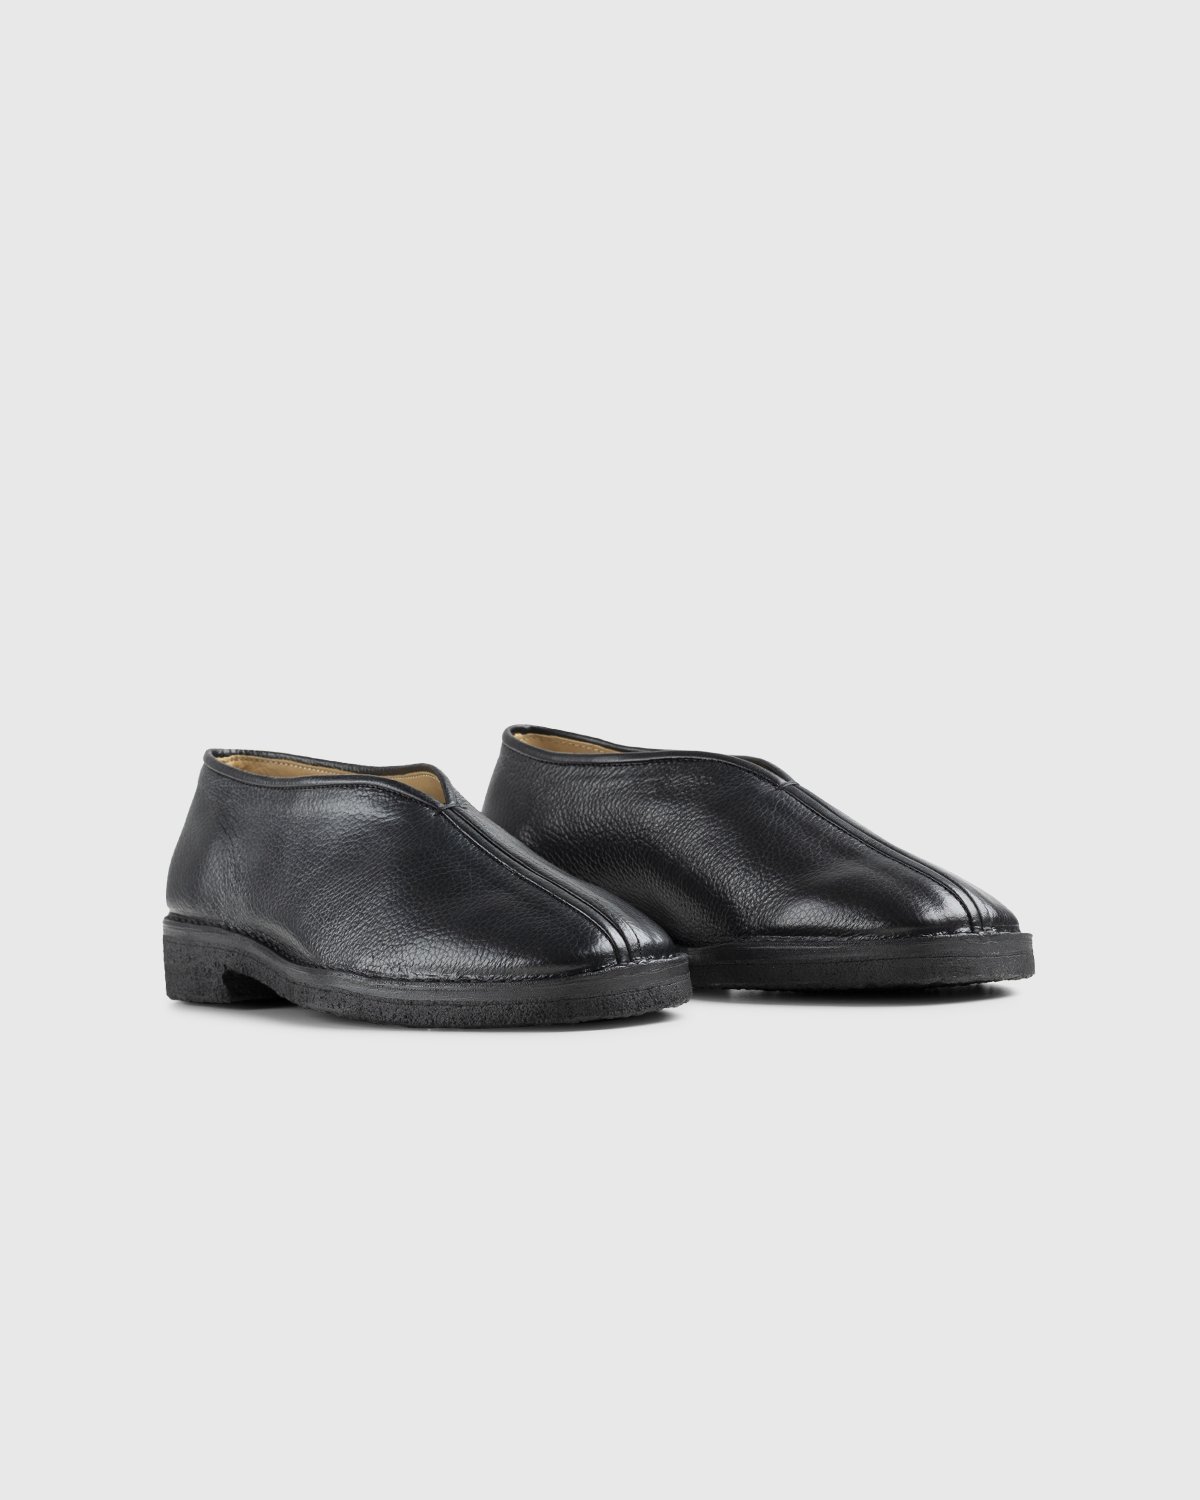 Lemaire - Leather Chinese Slippers Black - Footwear - Black - Image 4